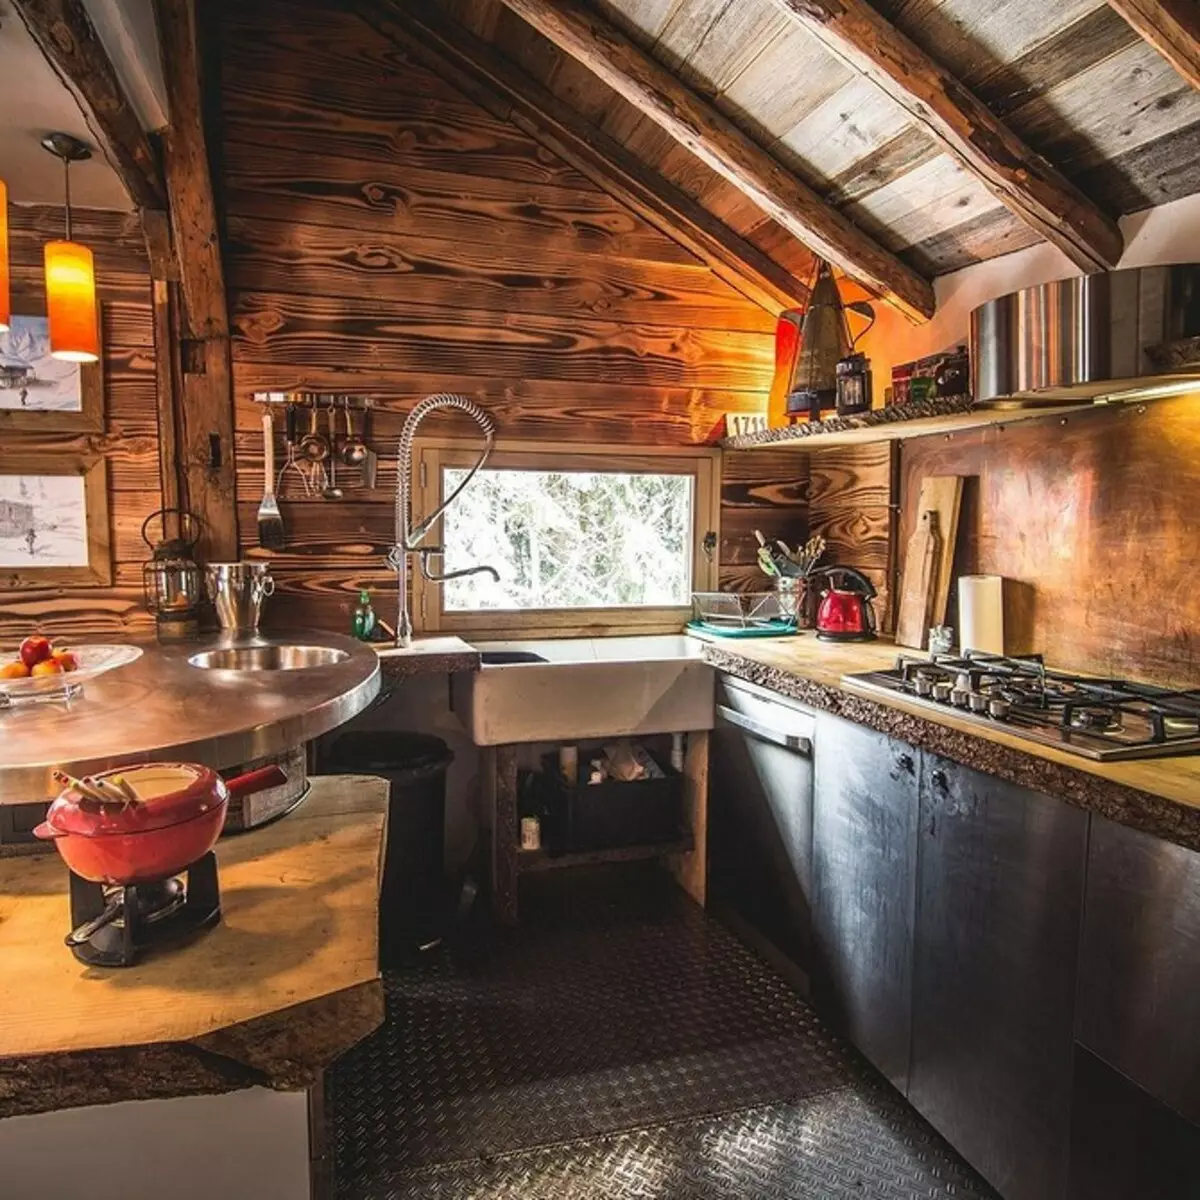 Idea for a country house: a kitchen in the style of chalet 511_58